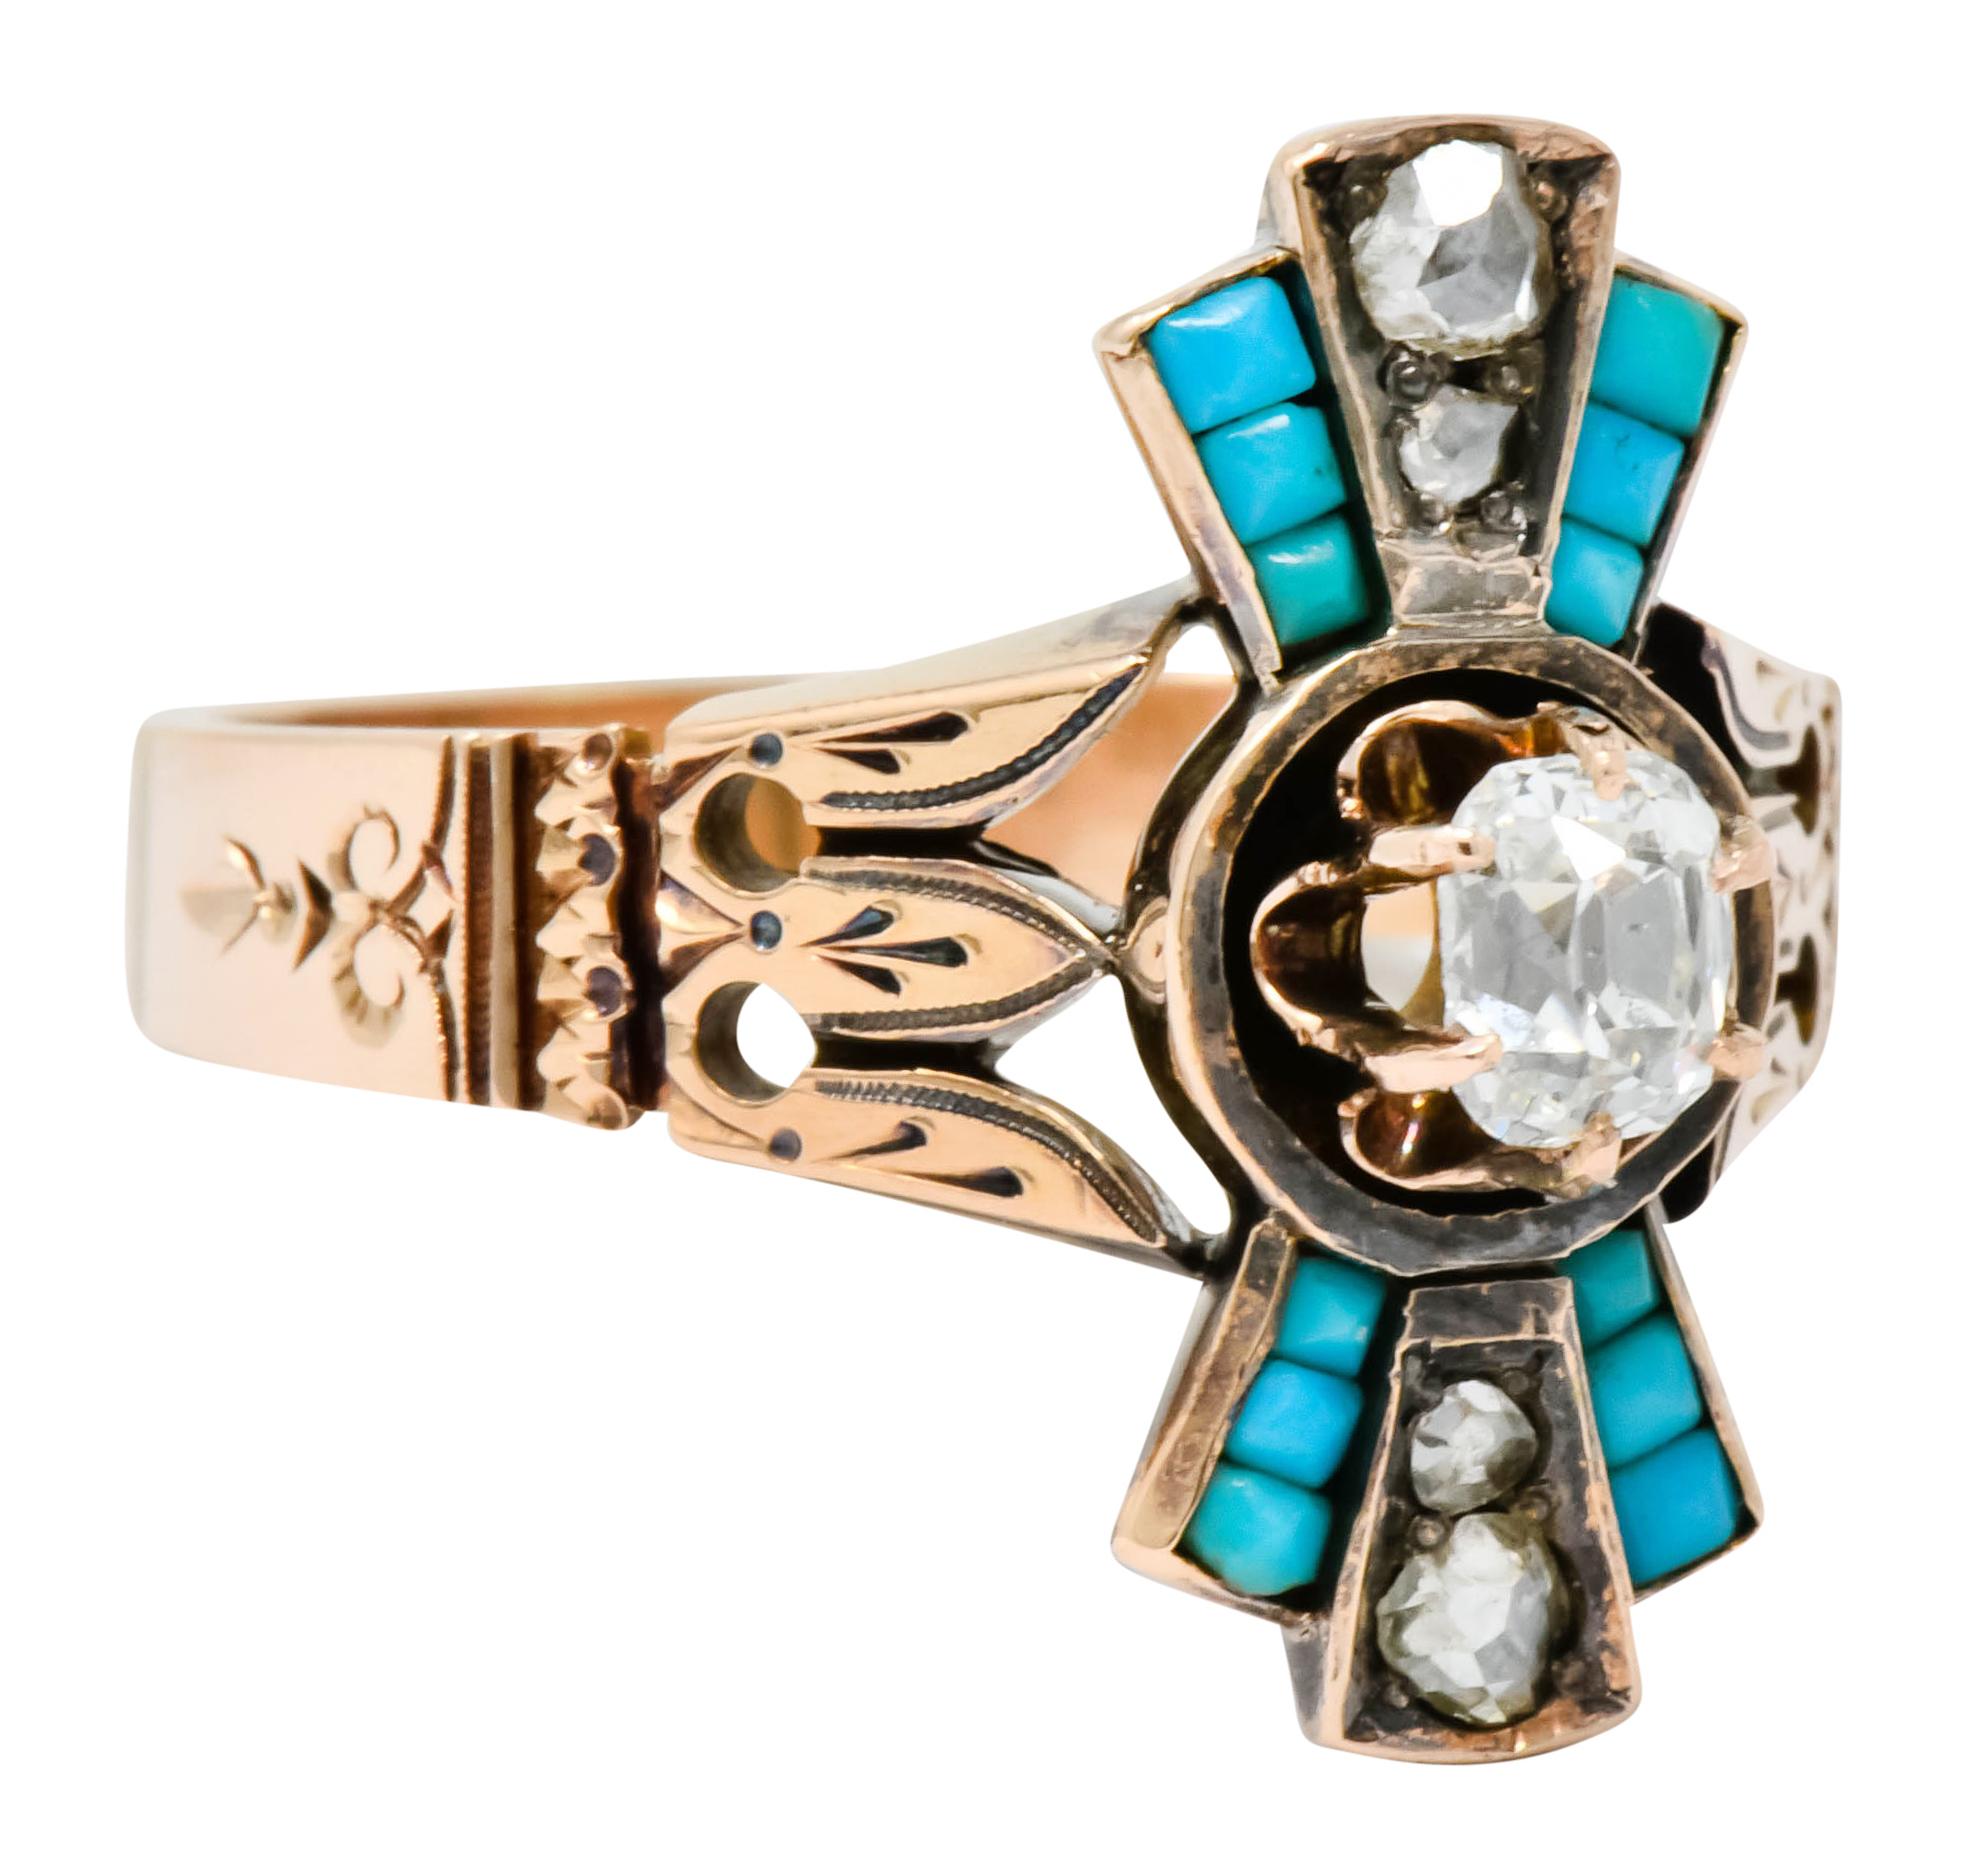 Designed as two sets of stepped rays, North and South, that features calibré cut turquoise; opaque and sky blue to greenish-blue in color

With rose cut accents weighing approximately 0.17 carat total

Ring centers a belcher set old mine cut diamond